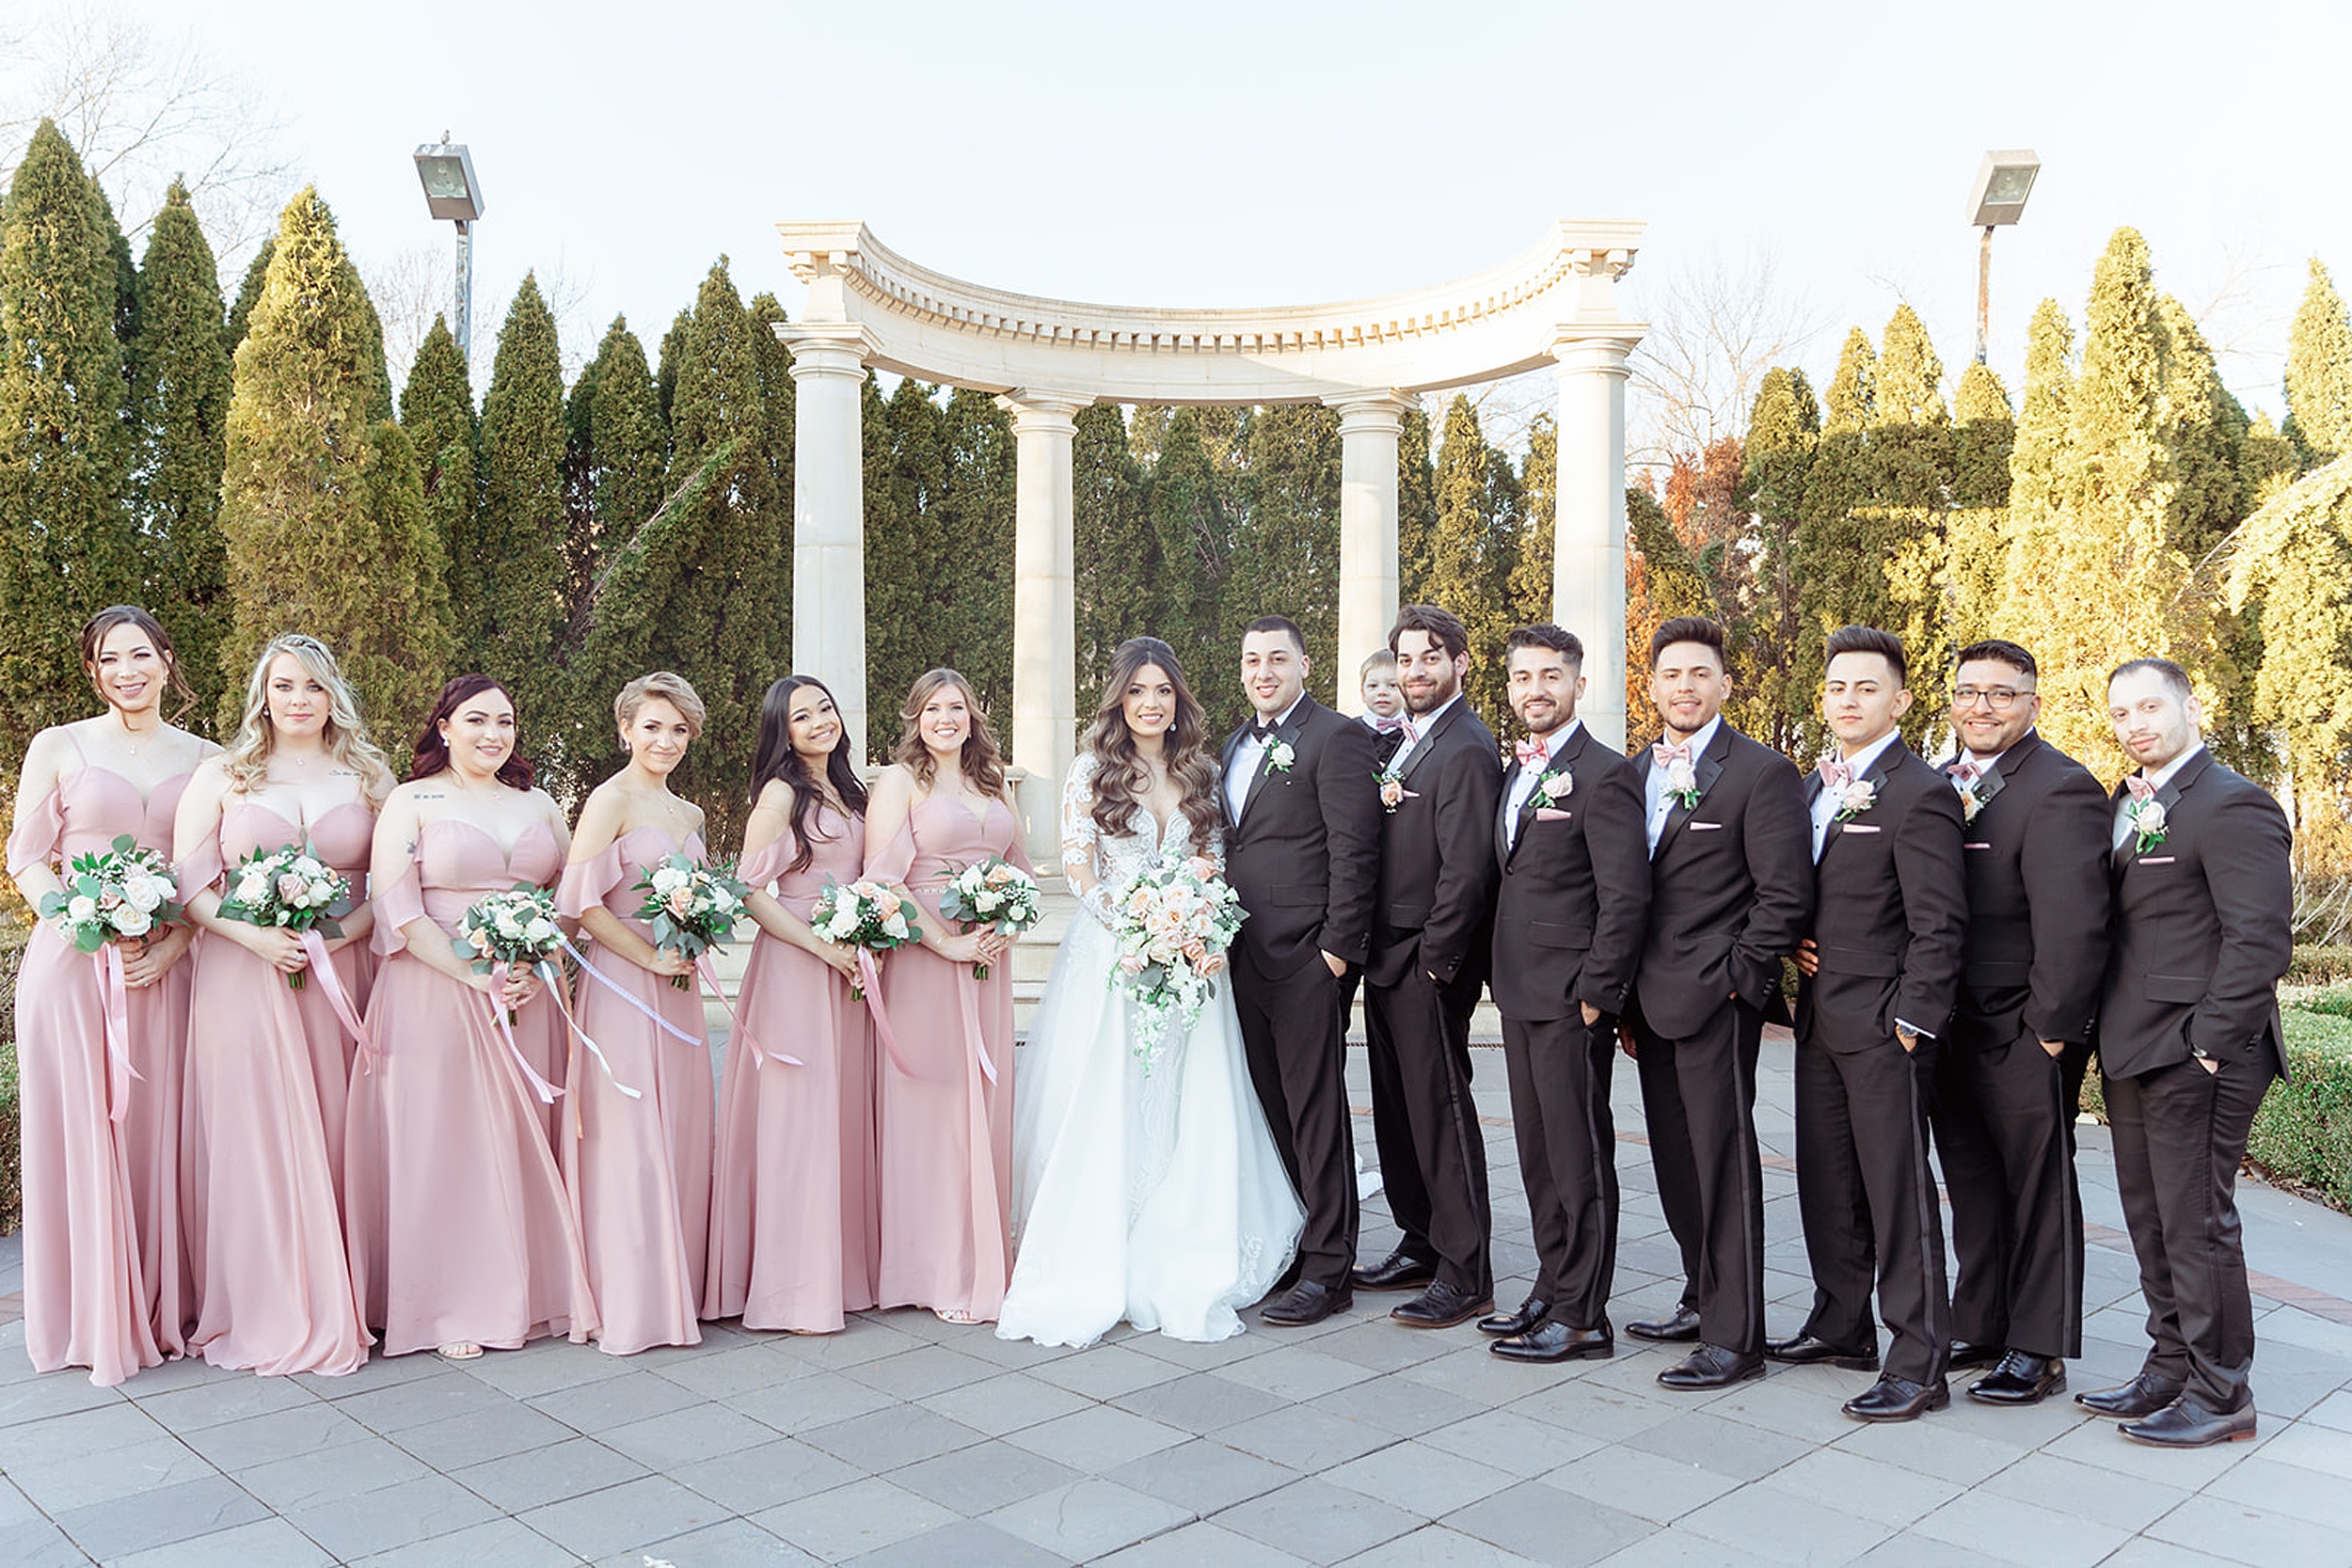 Newlyweds stand together in a garden patio with their wedding party surrounding them